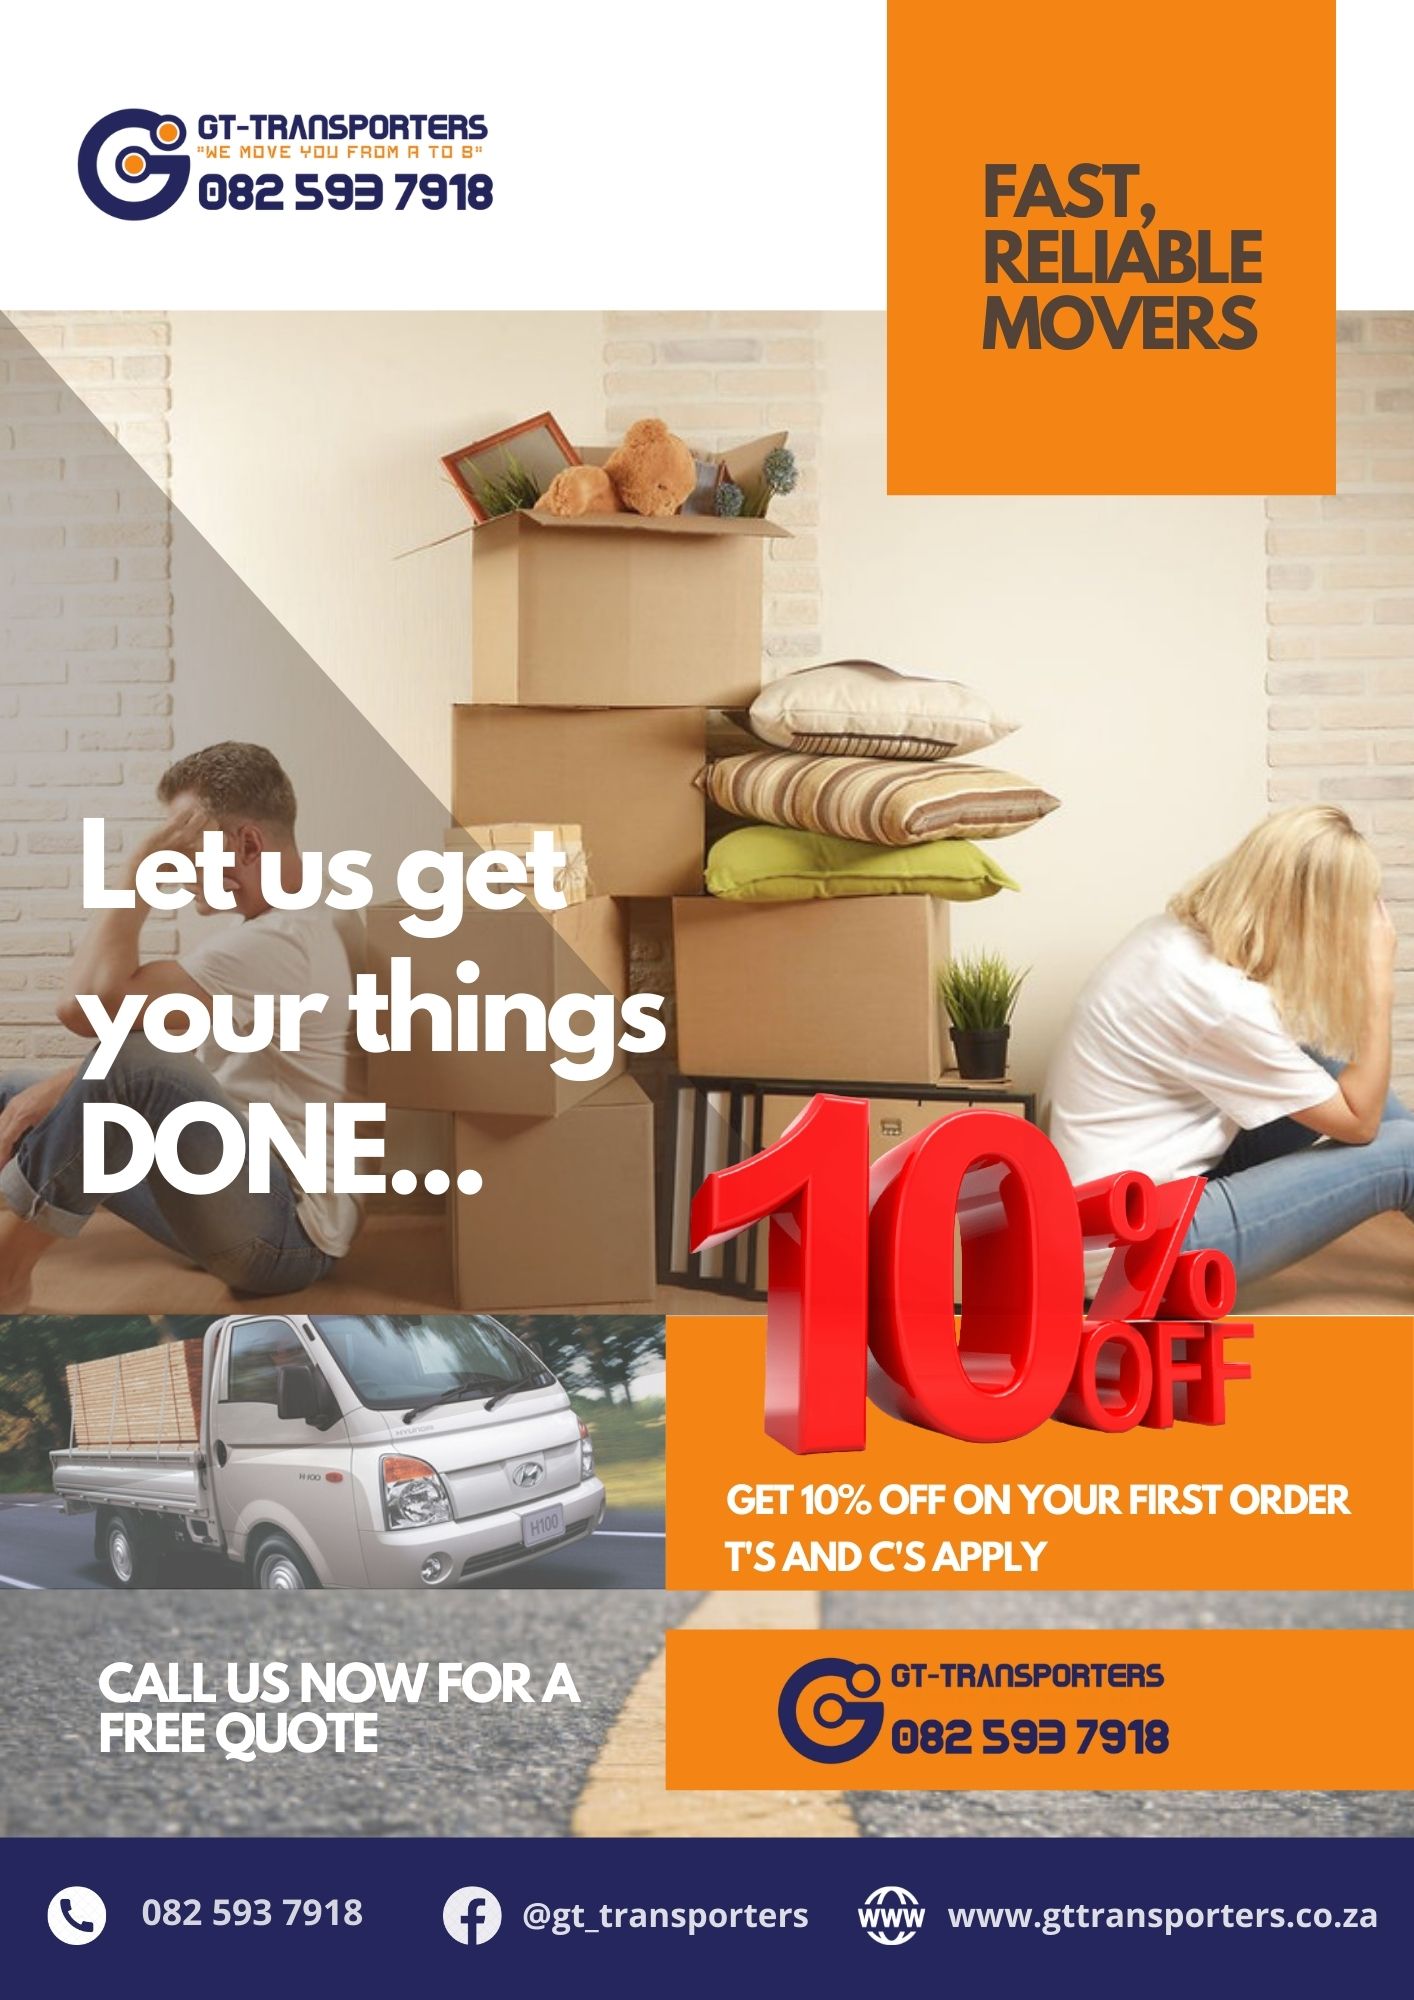 for the best Moving and Delivery services , contact us for a FREE QUOTE